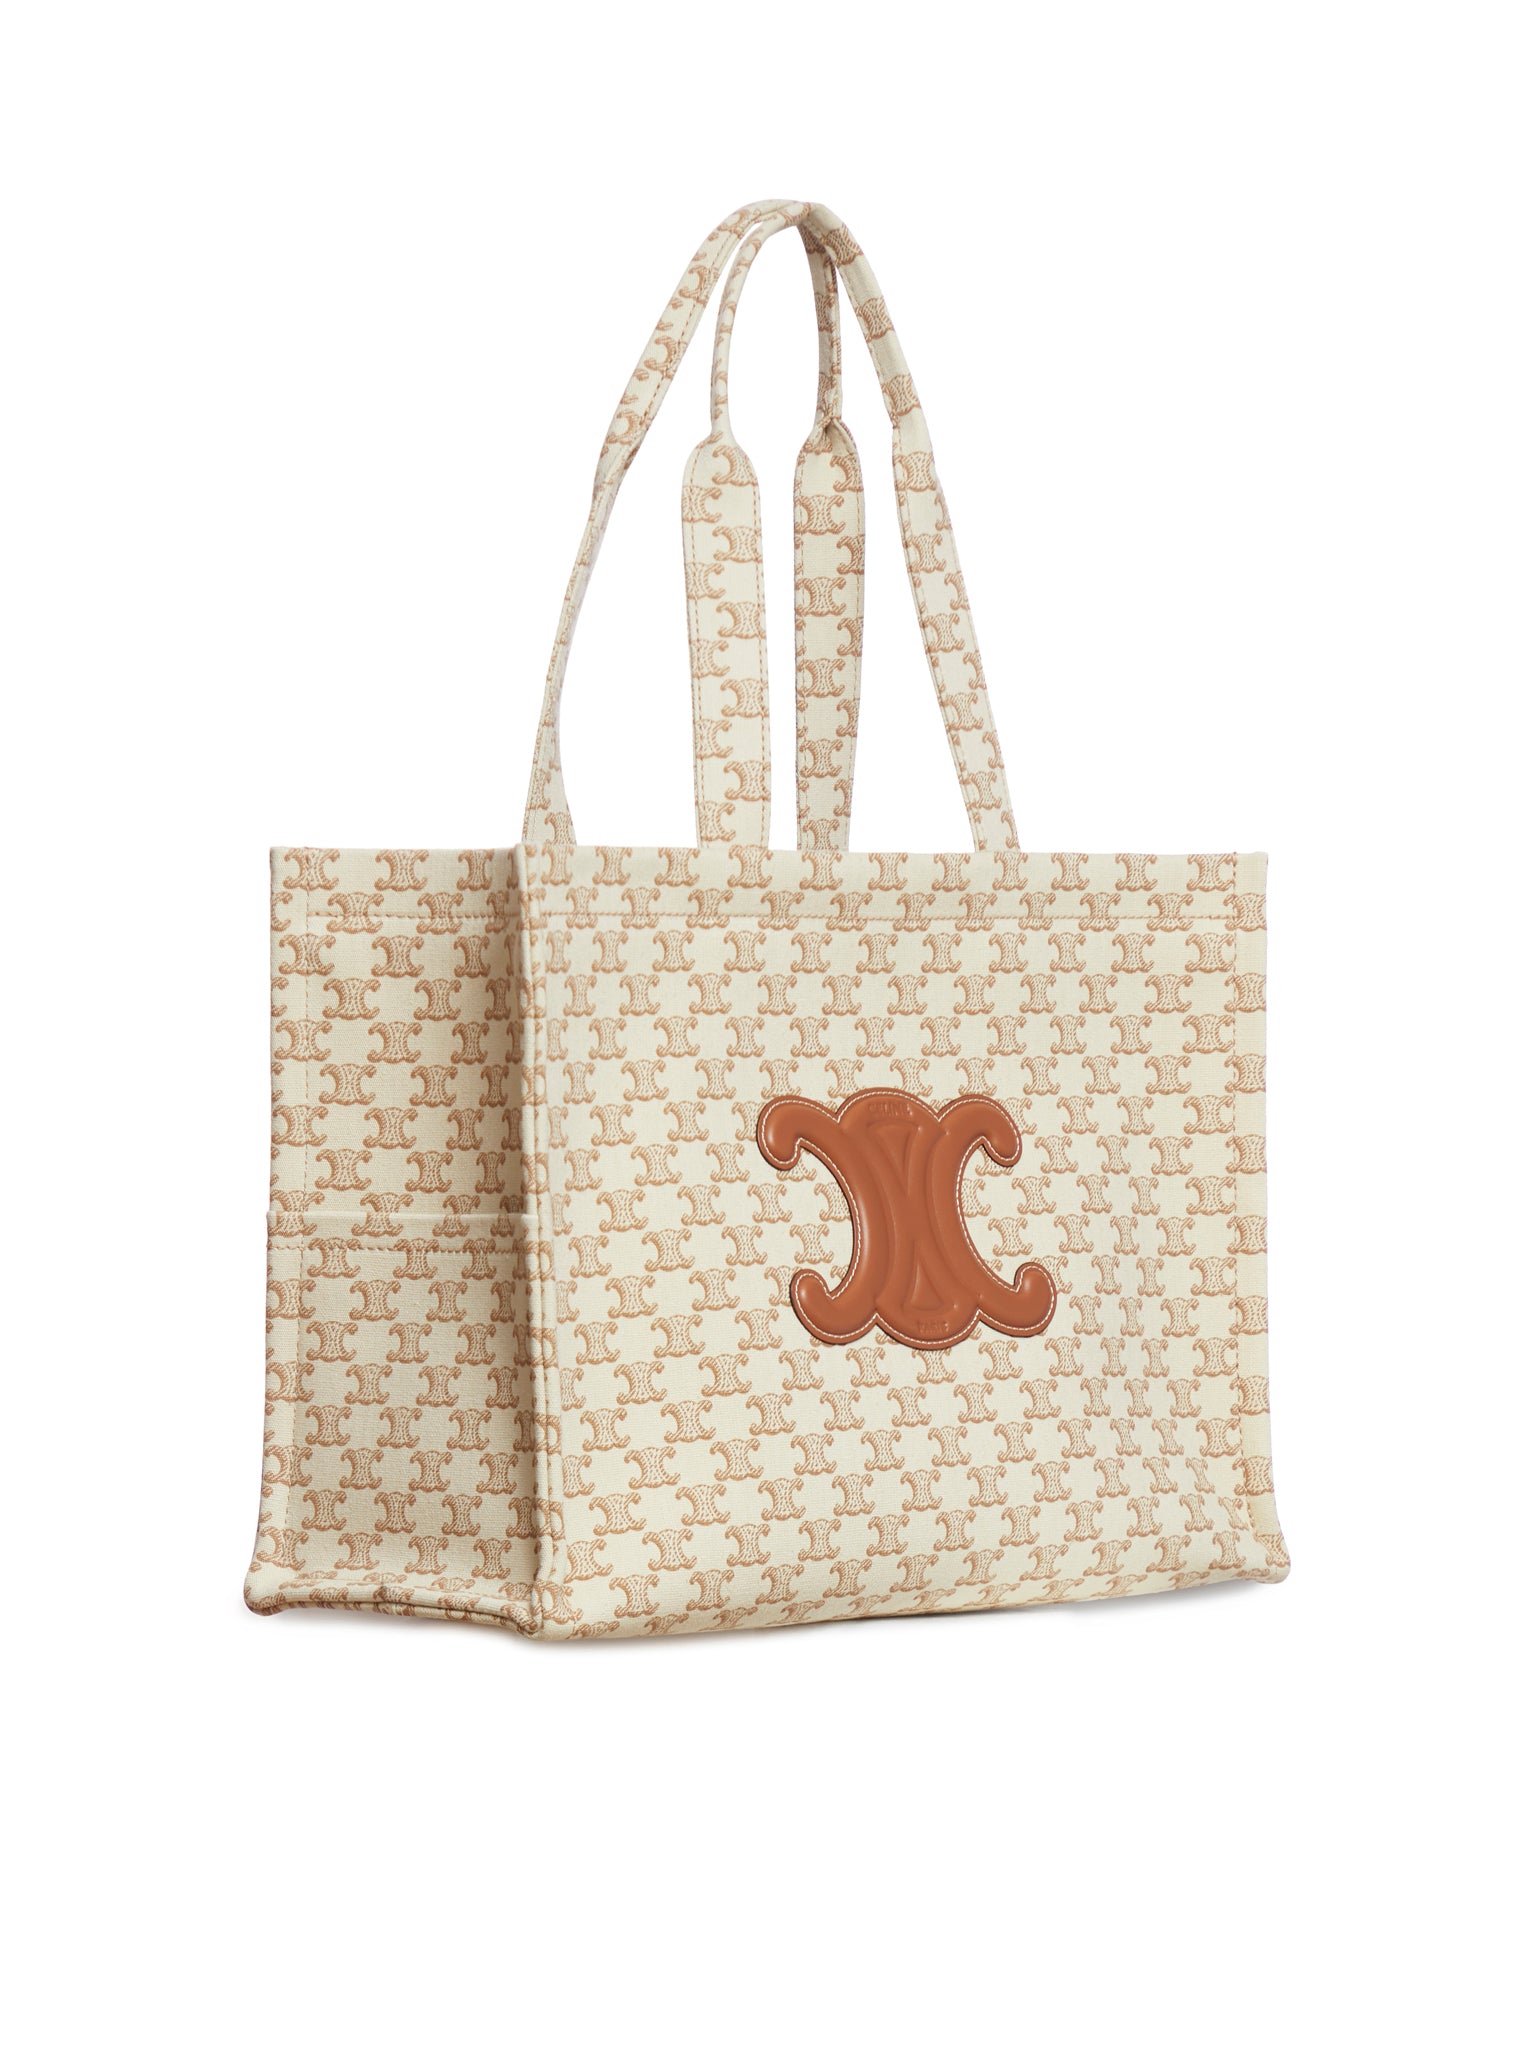 LARGE CABAS THAIS BAG IN FABRIC WITH ALL-OVER LOGO